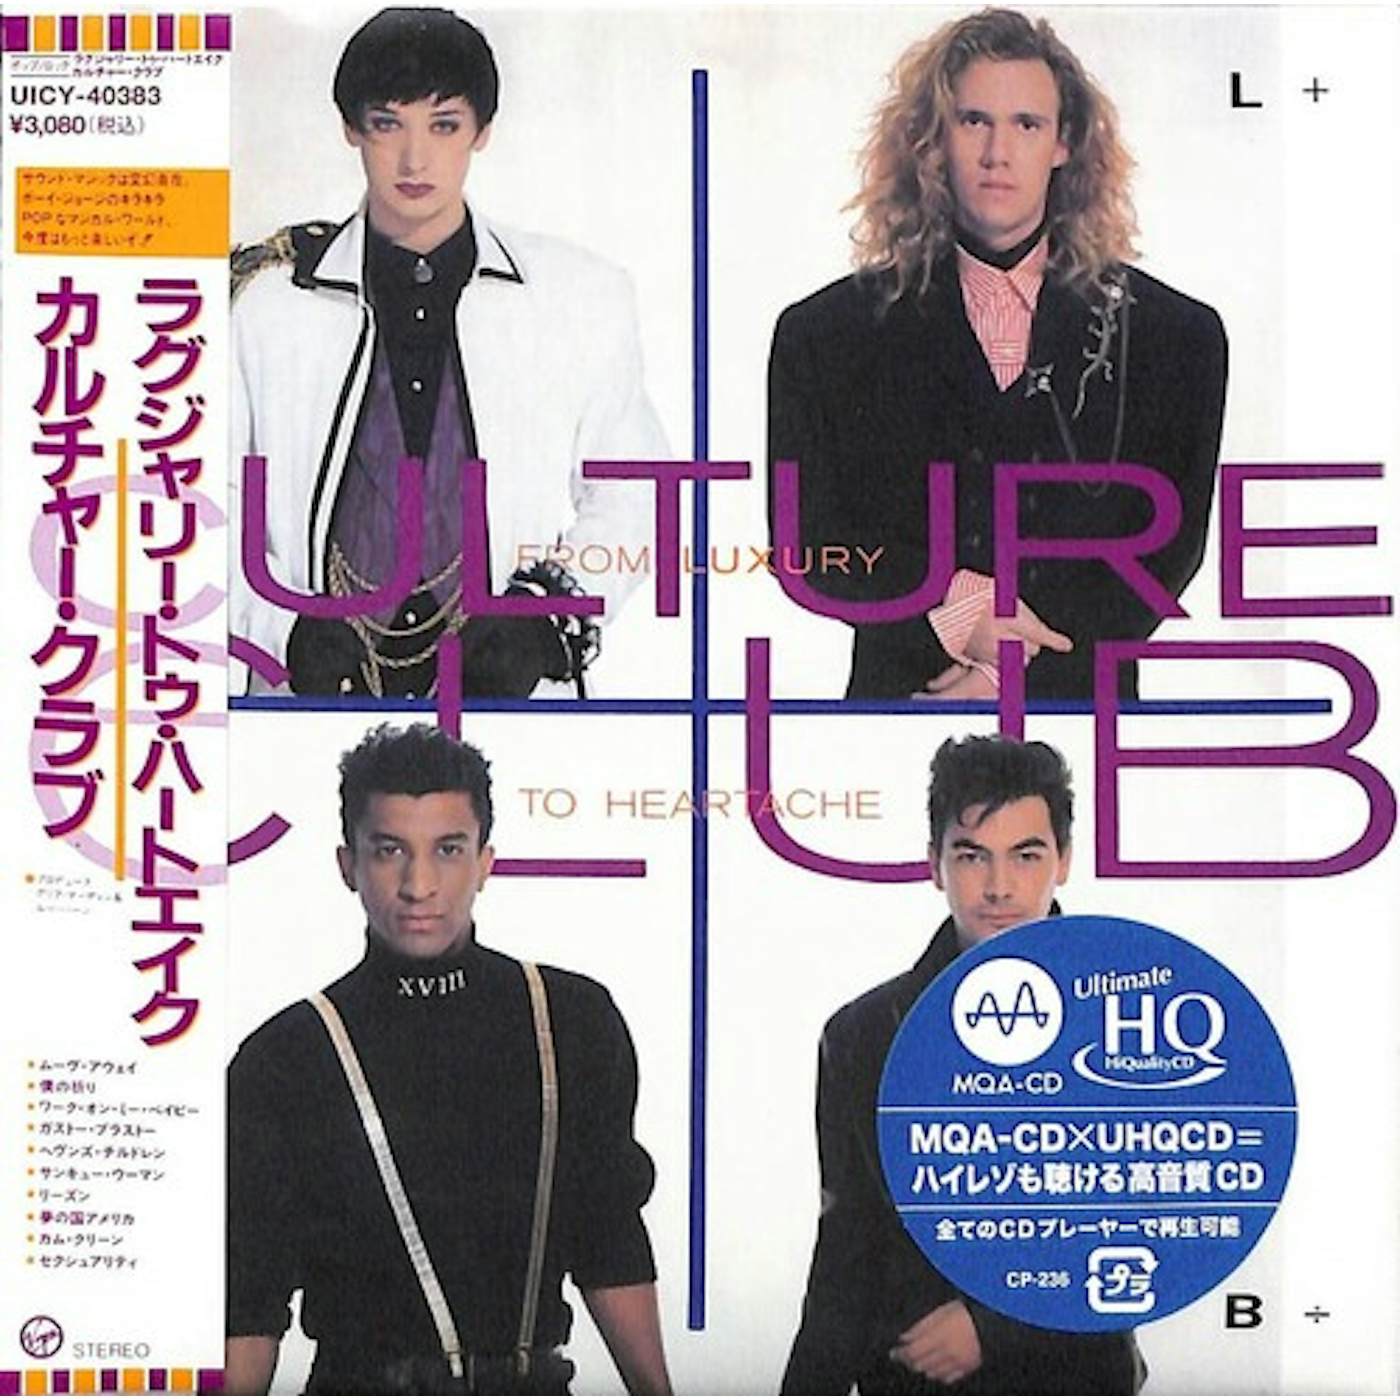 Culture Club FROM LUXURY TO HEARTACHE CD